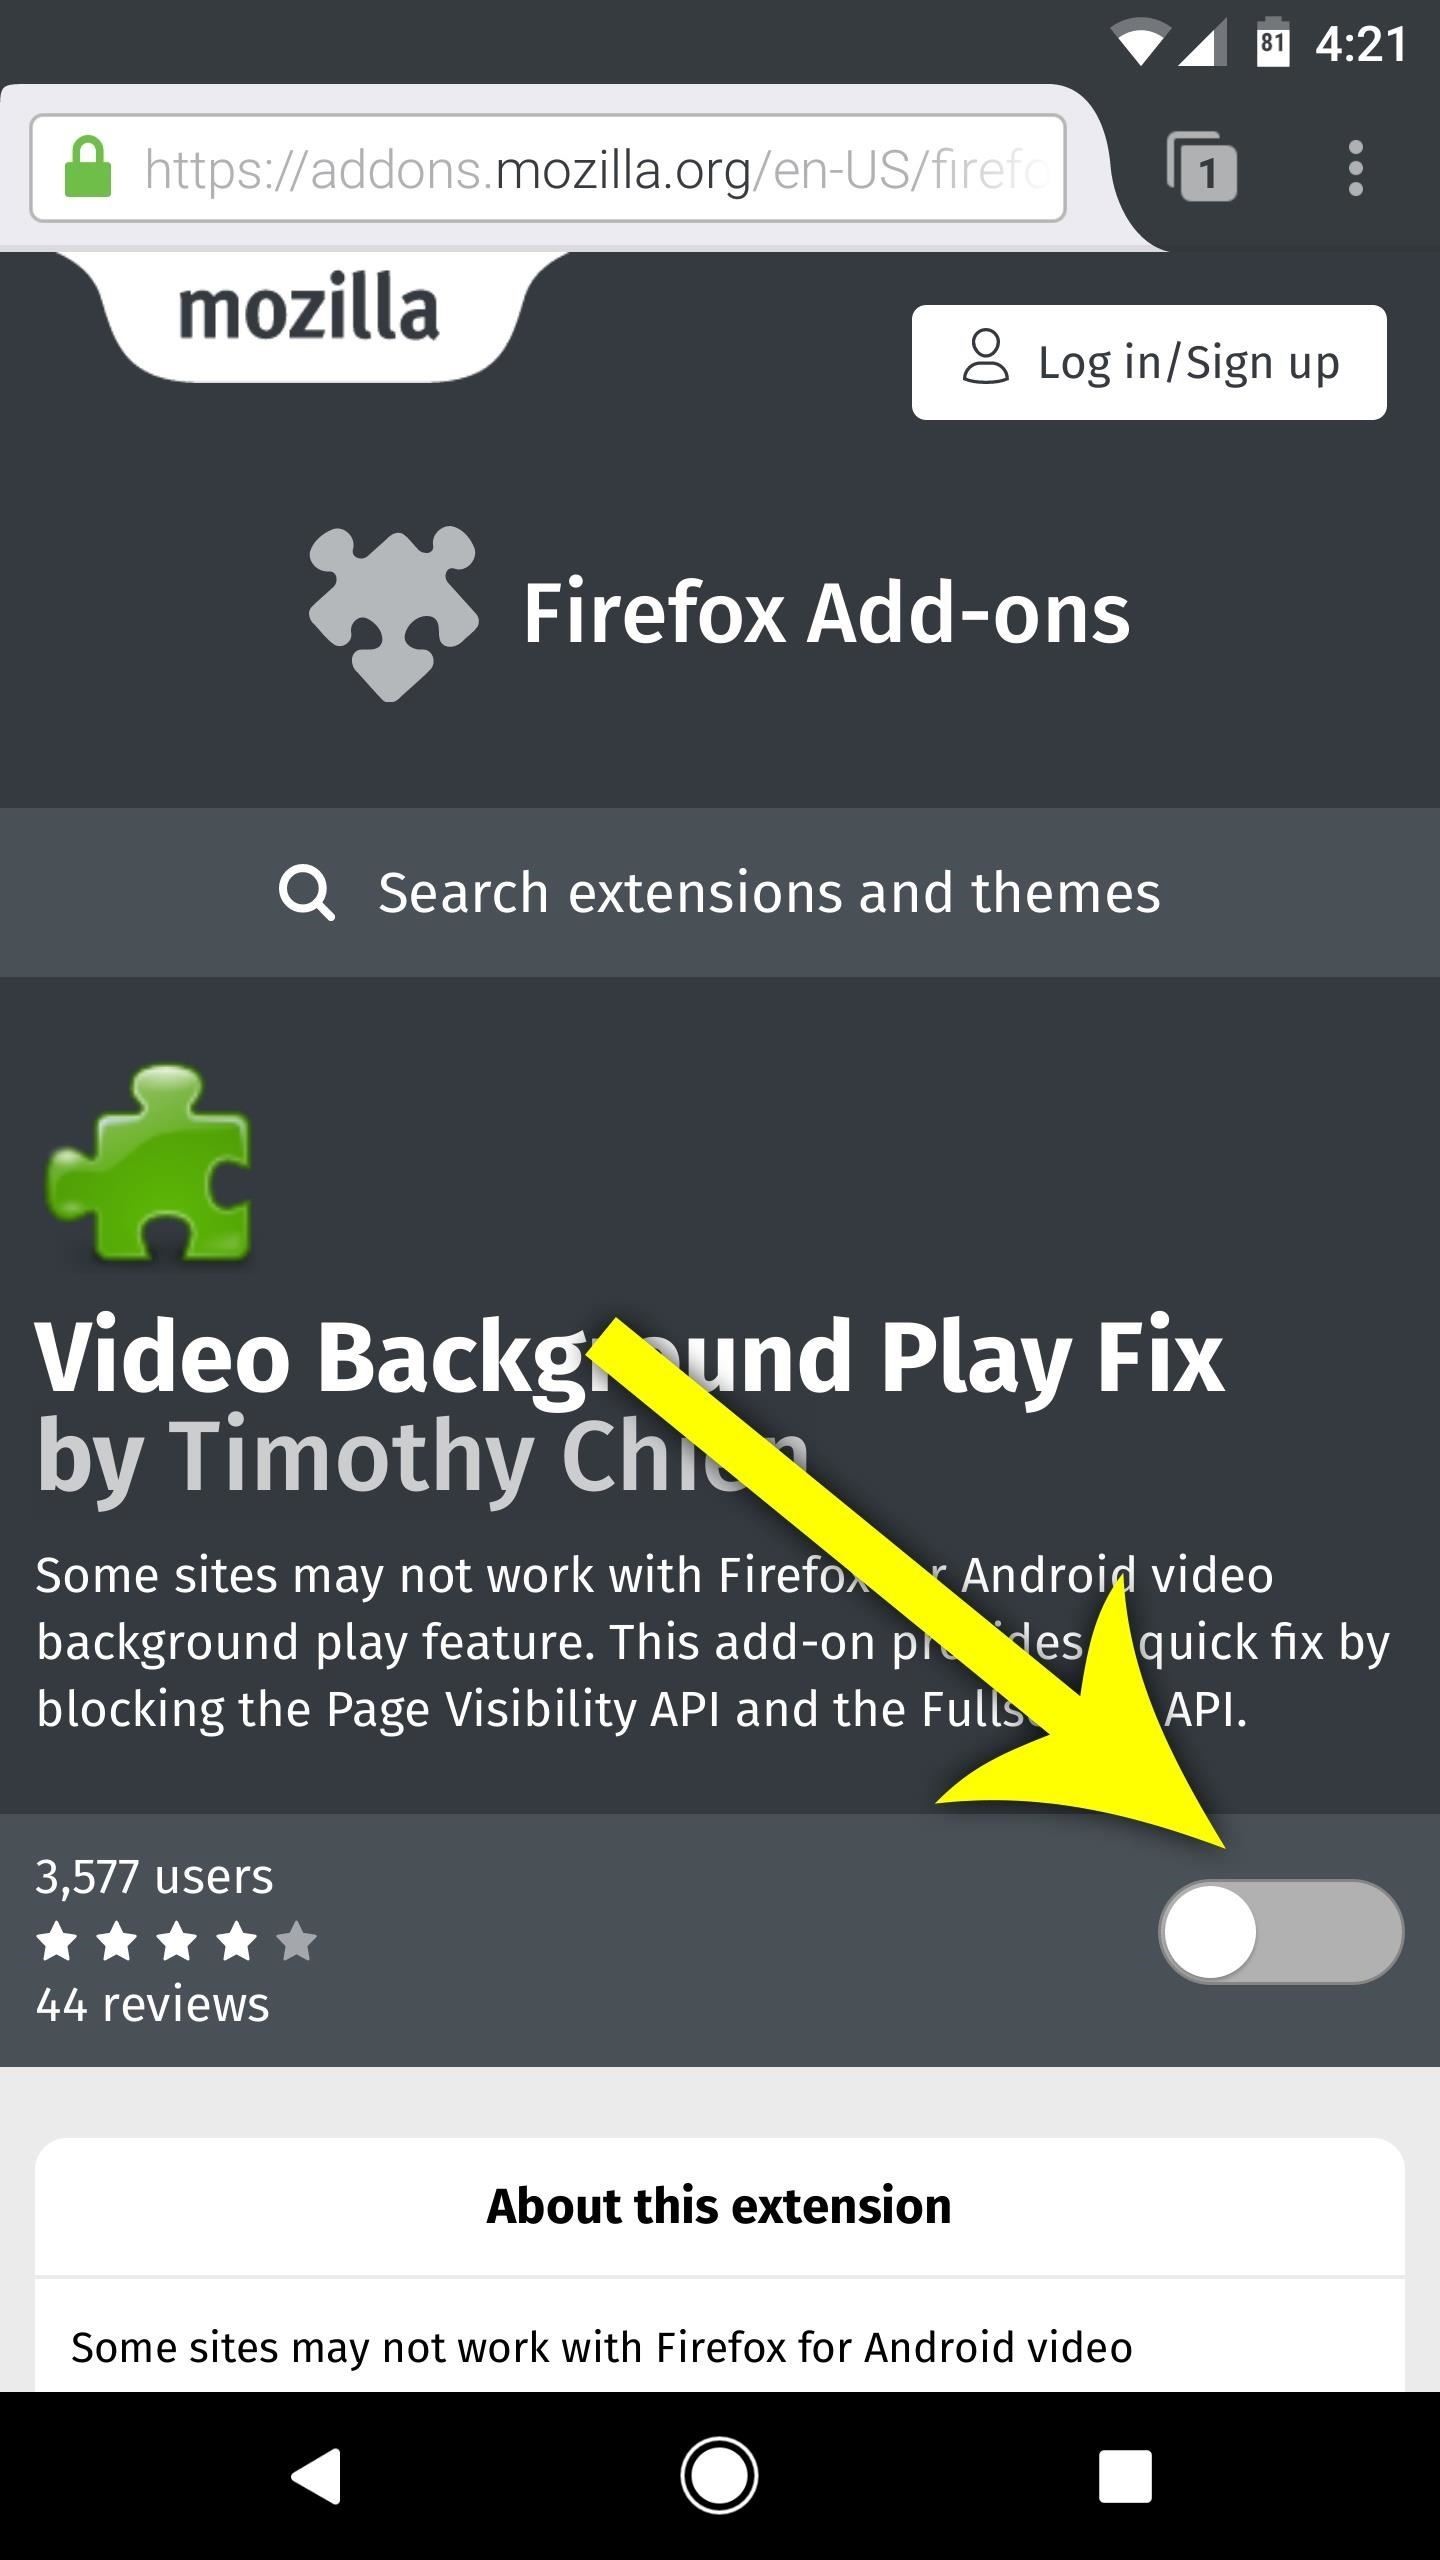 1440x2560 From now on, you can lock your screen, press your home button, or switch to  any other app after you've started playing a YouTube video in Firefox, ...